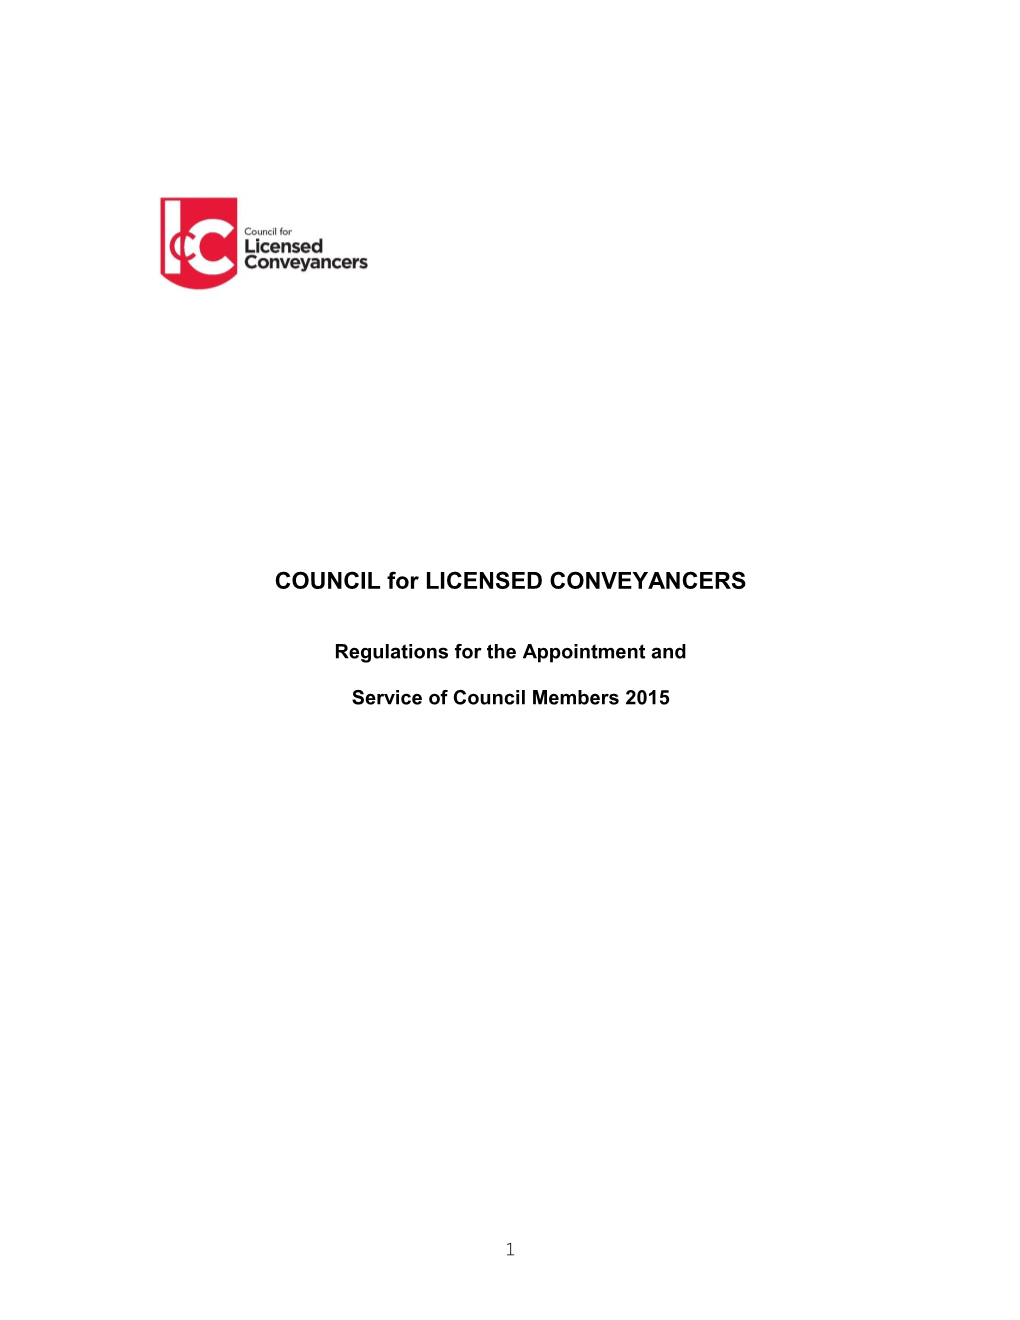 Appointment Regulations 2015